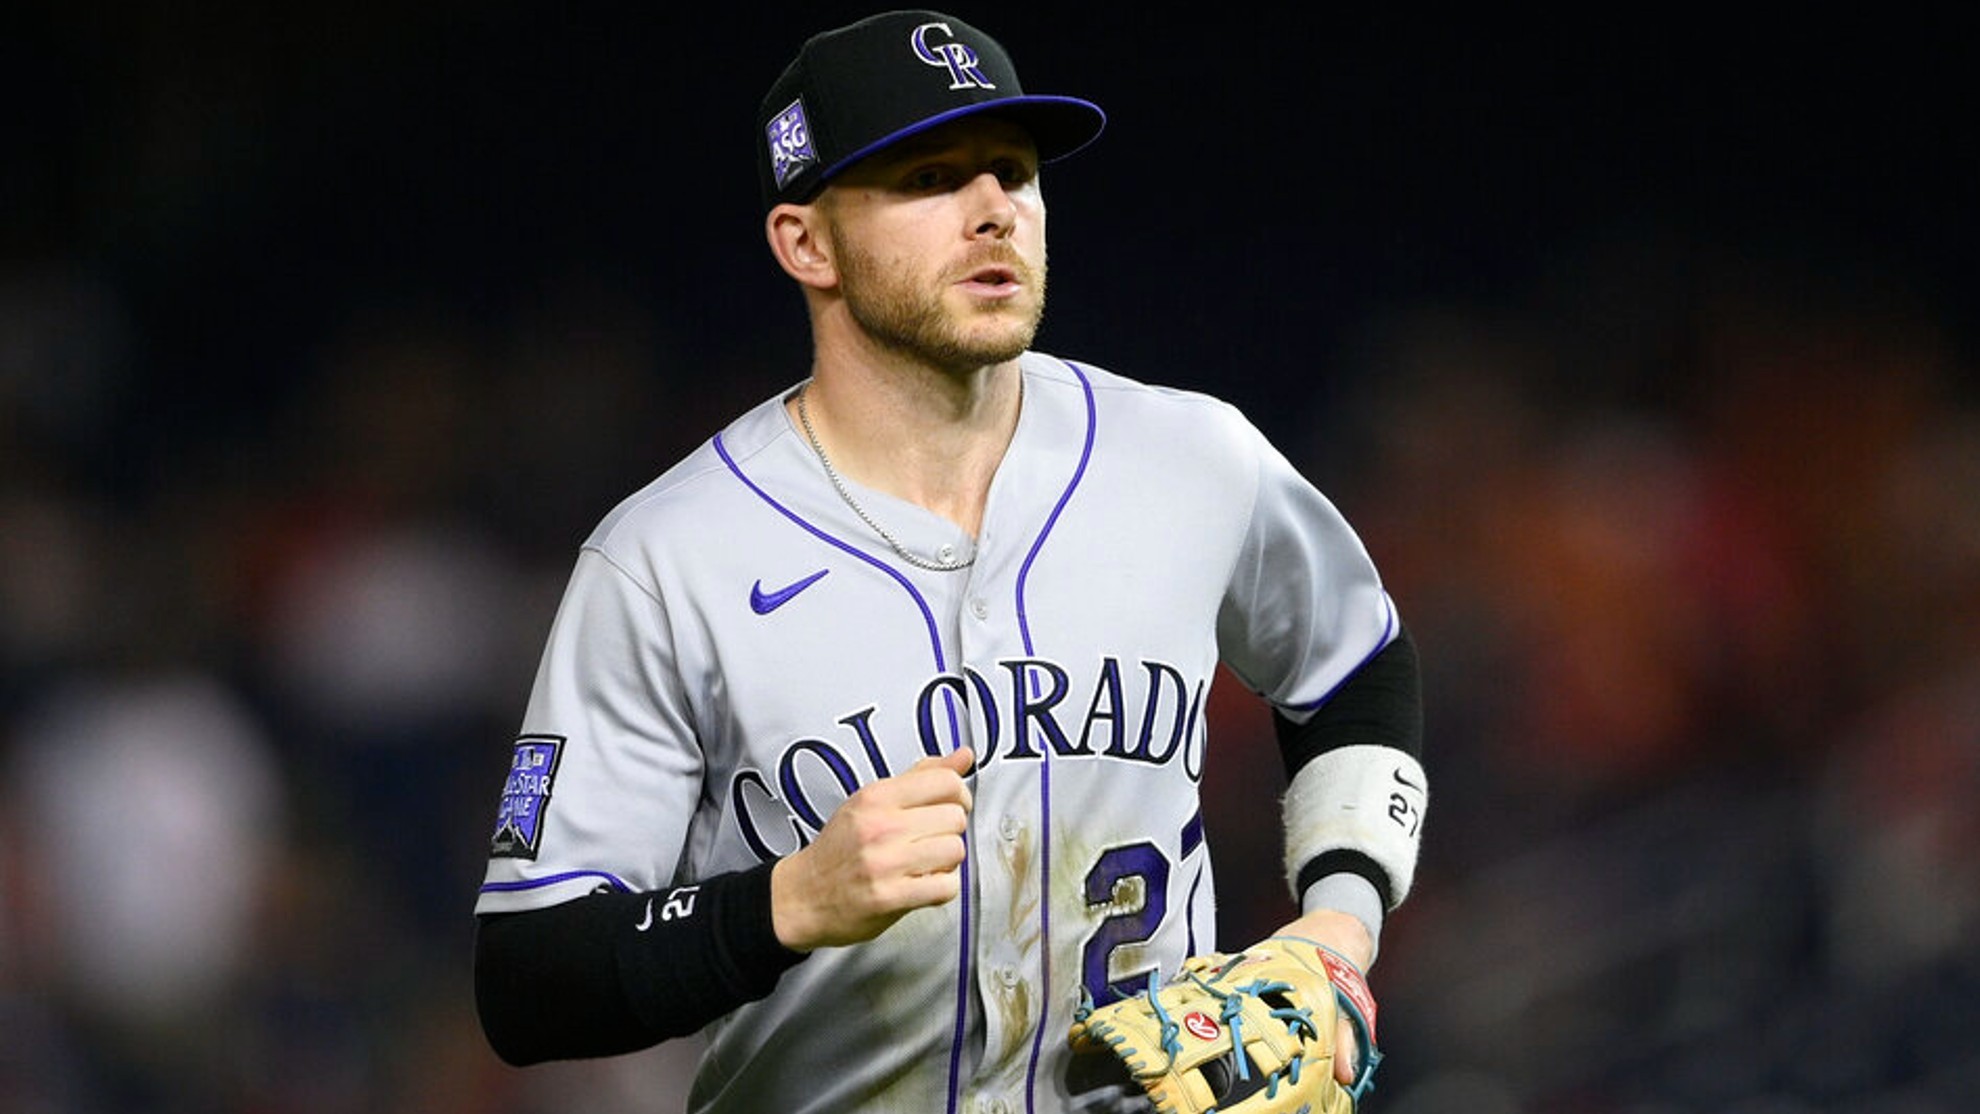 Trevor Story, one of the most wanted free agents, signs for the Boston Red Sox